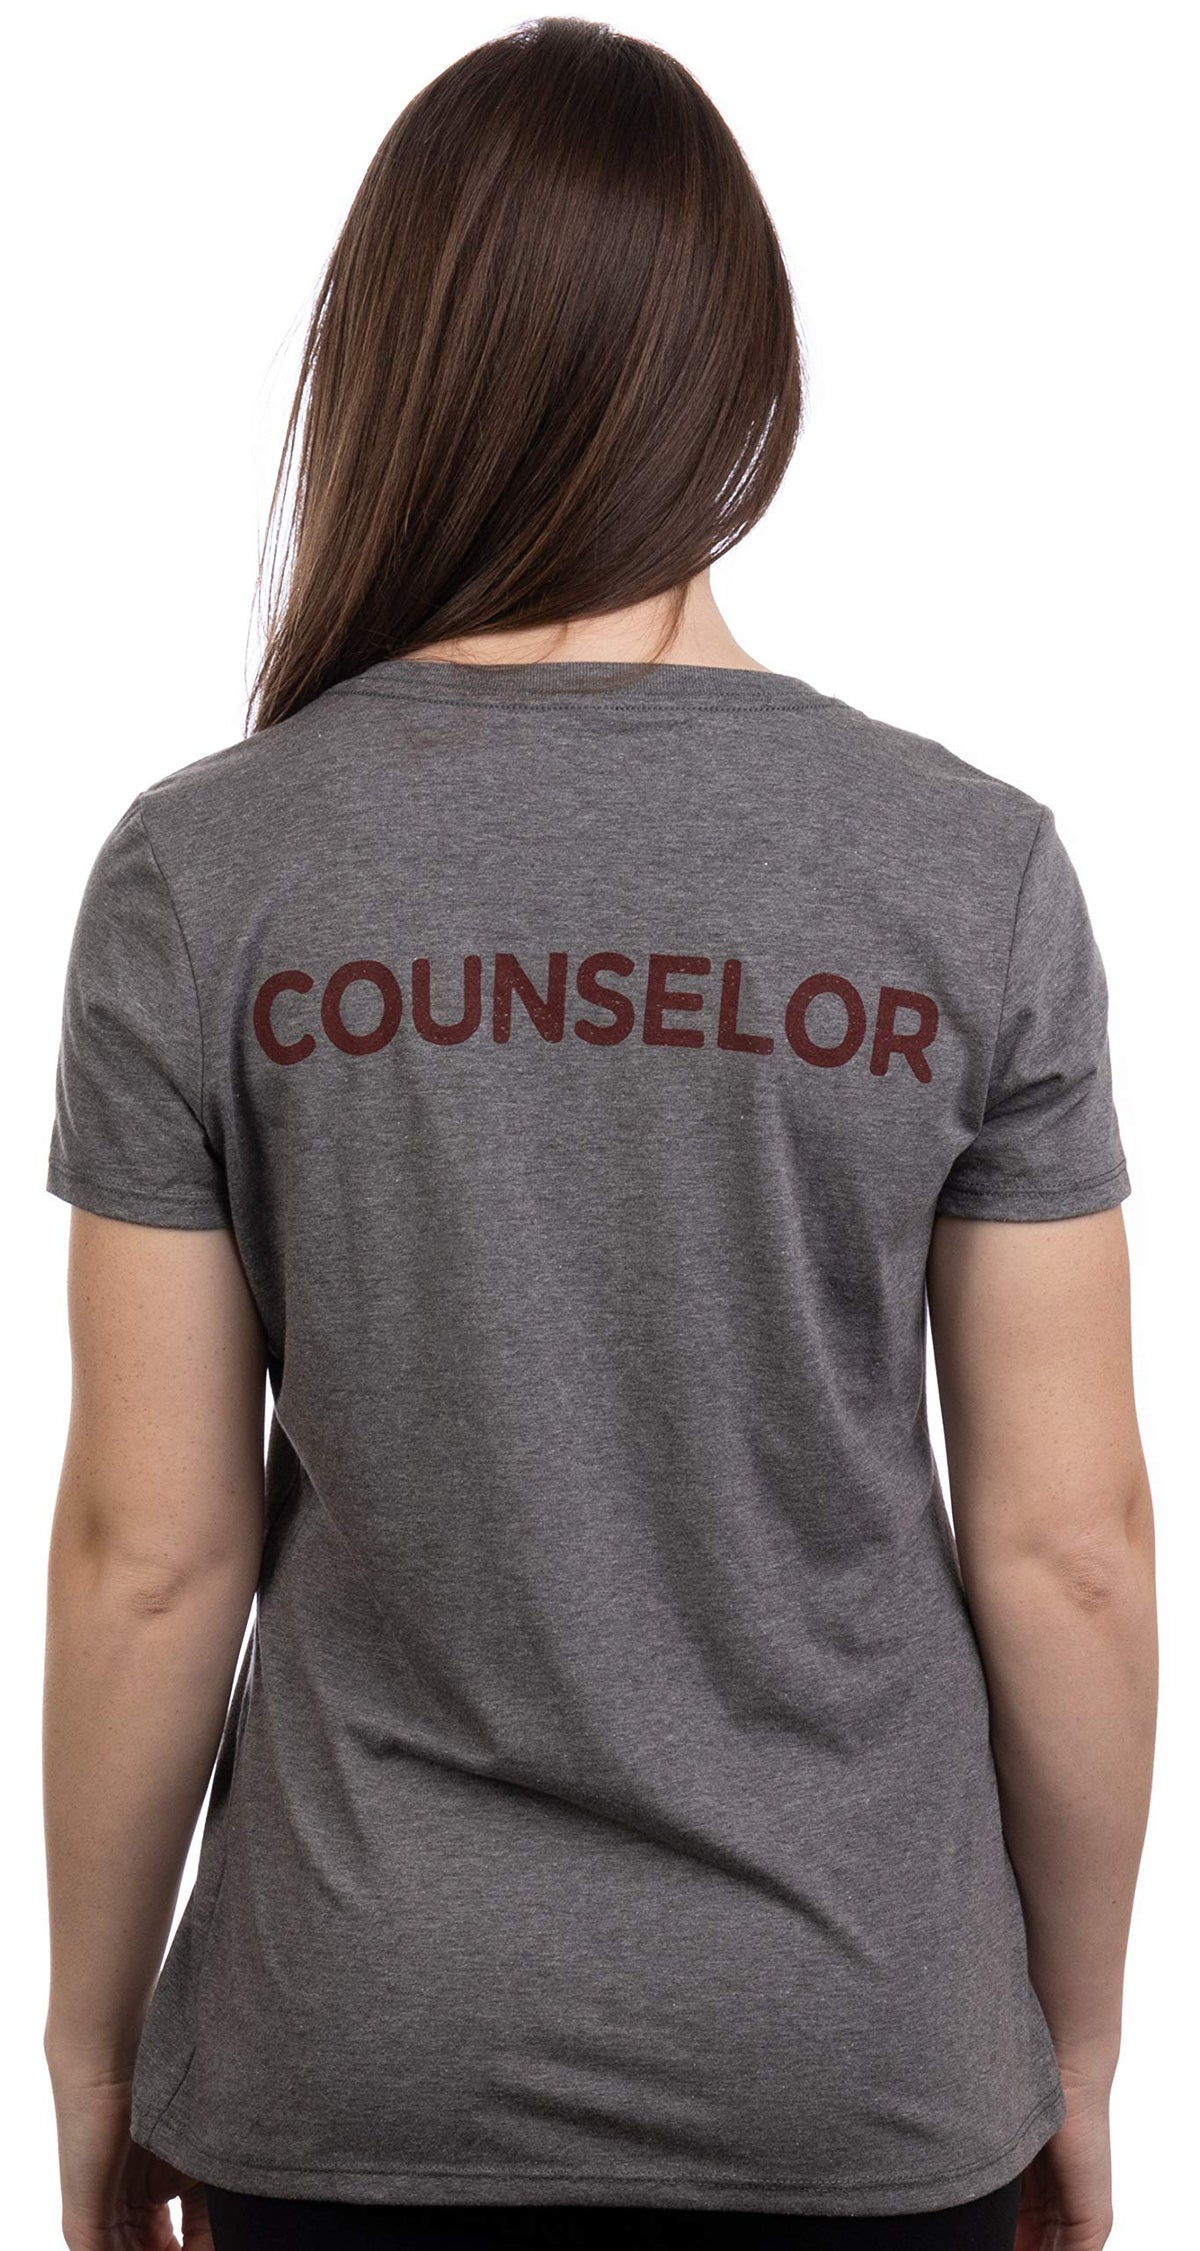 Camp Crystal Lake Counselor - V-Neck Tee - Women's